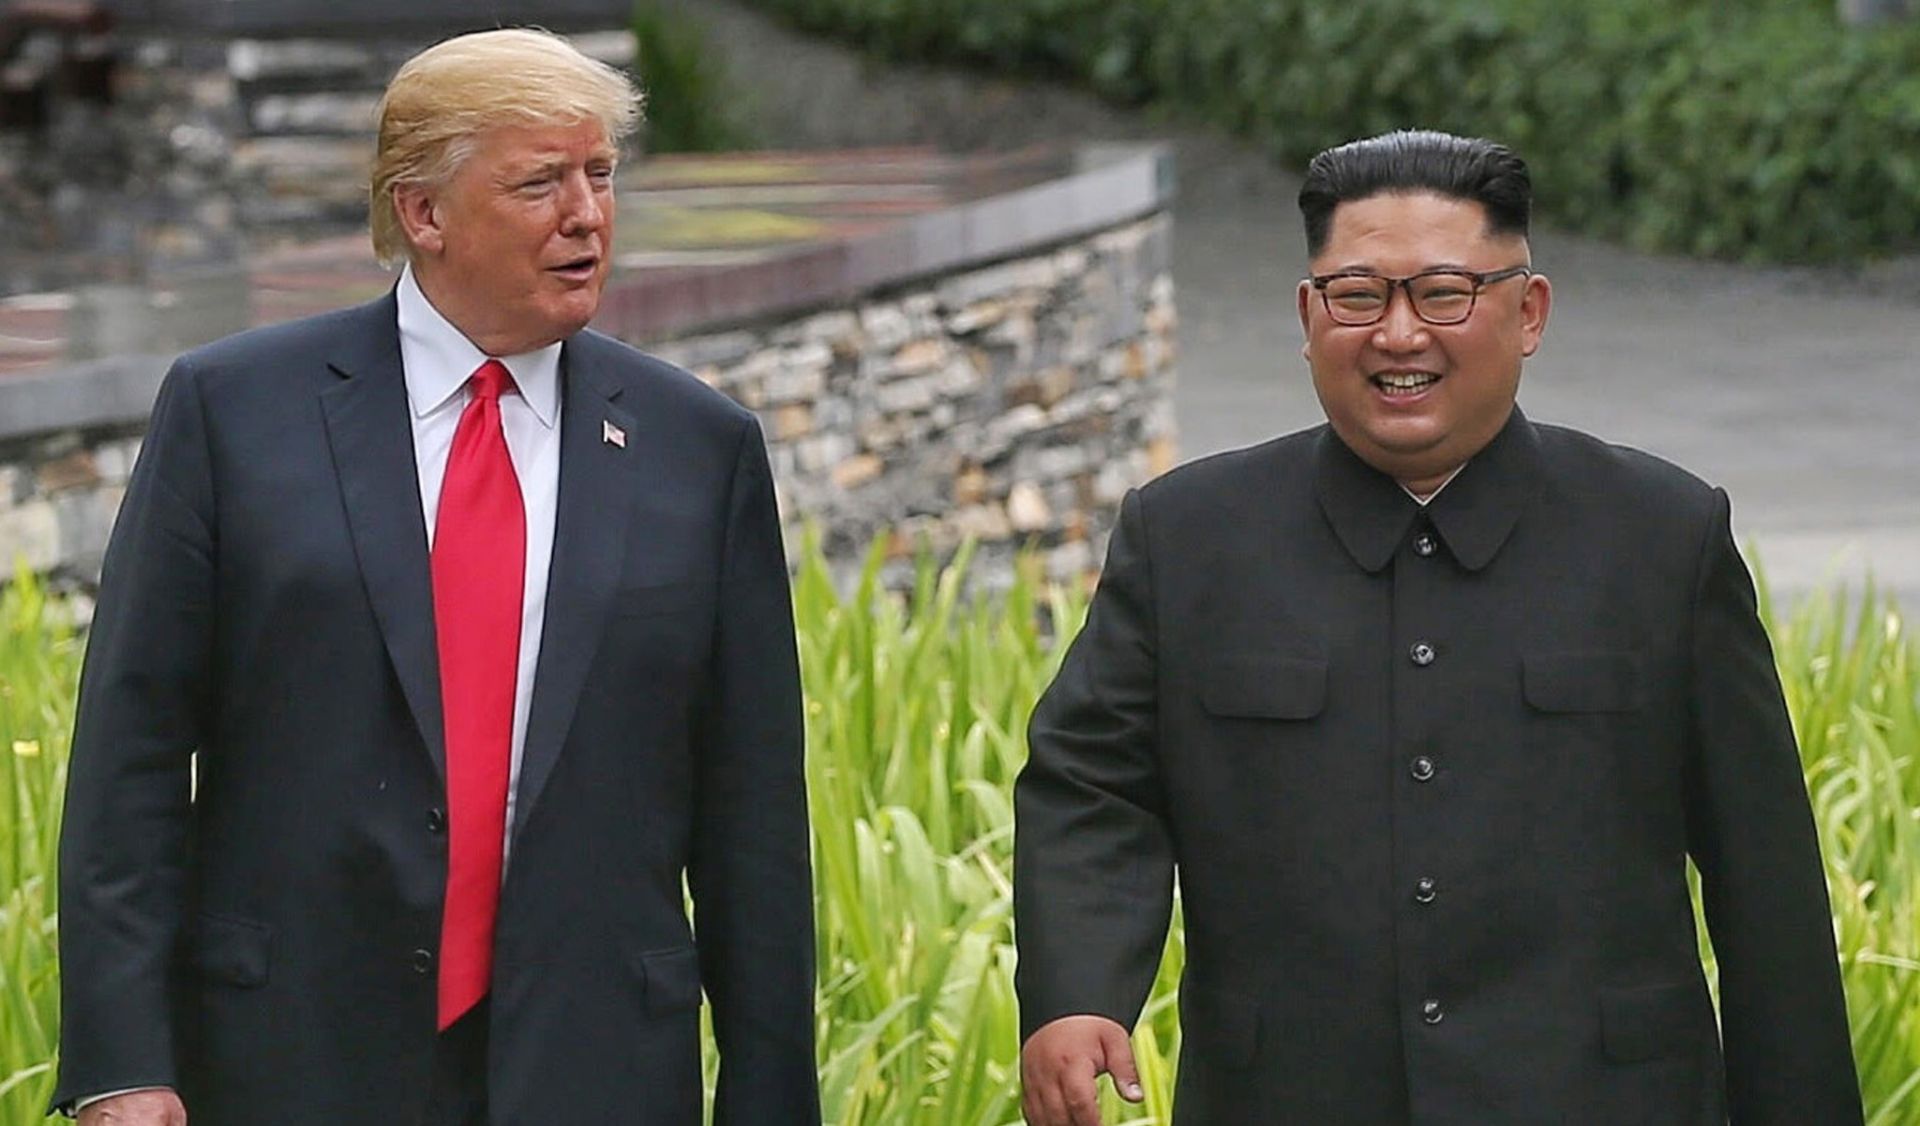 epa07346586 (FILE) - US President Donald J. Trump (L) and North Korean leader Kim Jong-un (R) stroll together through the grounds of the Capella Hotel after their working lunch during the historic summit at the Capella Hotel on Sentosa Island, Singapore, 12 June 2018(reissued 06 February 2019). According to South Korean media reports, a second summit is planned for US President Donald J. Trump and North Korean leader Kim Jong-un in Vietnam from 27 to 28 February 2019.  EPA/KEVIN LIM / THE STRAITS TIMES / SINGAPORE OUT  EDITORIAL USE ONLY